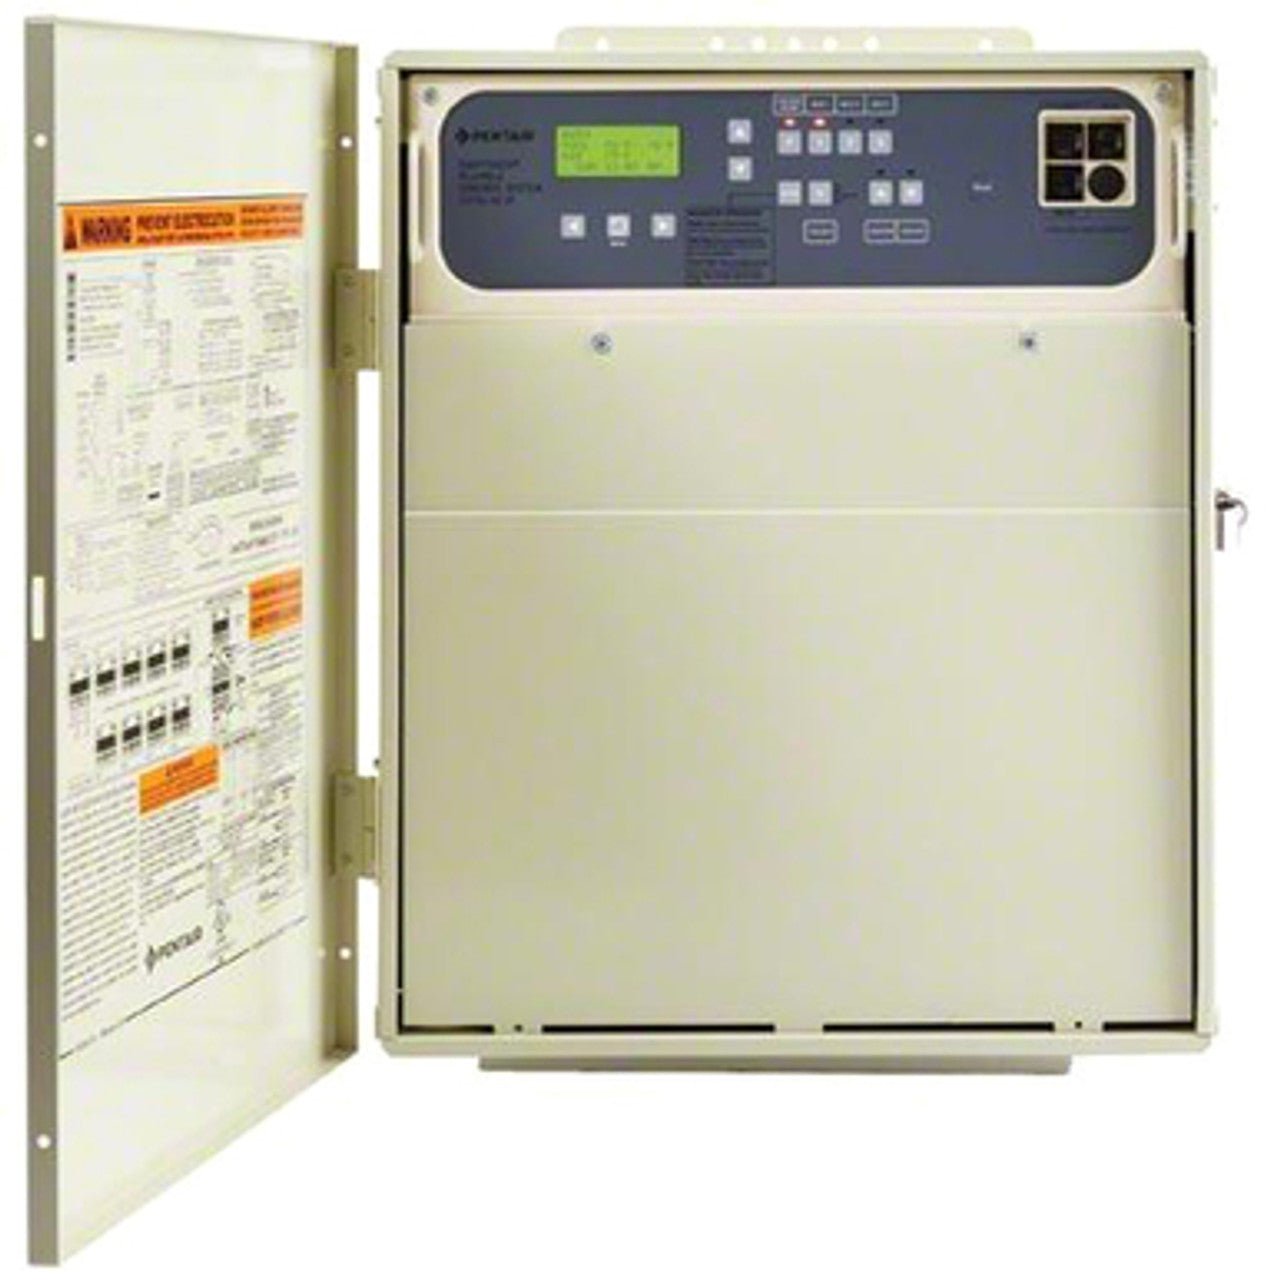 Pentair EasyTouch PSL4 Pool & Spa Base Automation 522354 - Pool Automation - img-1